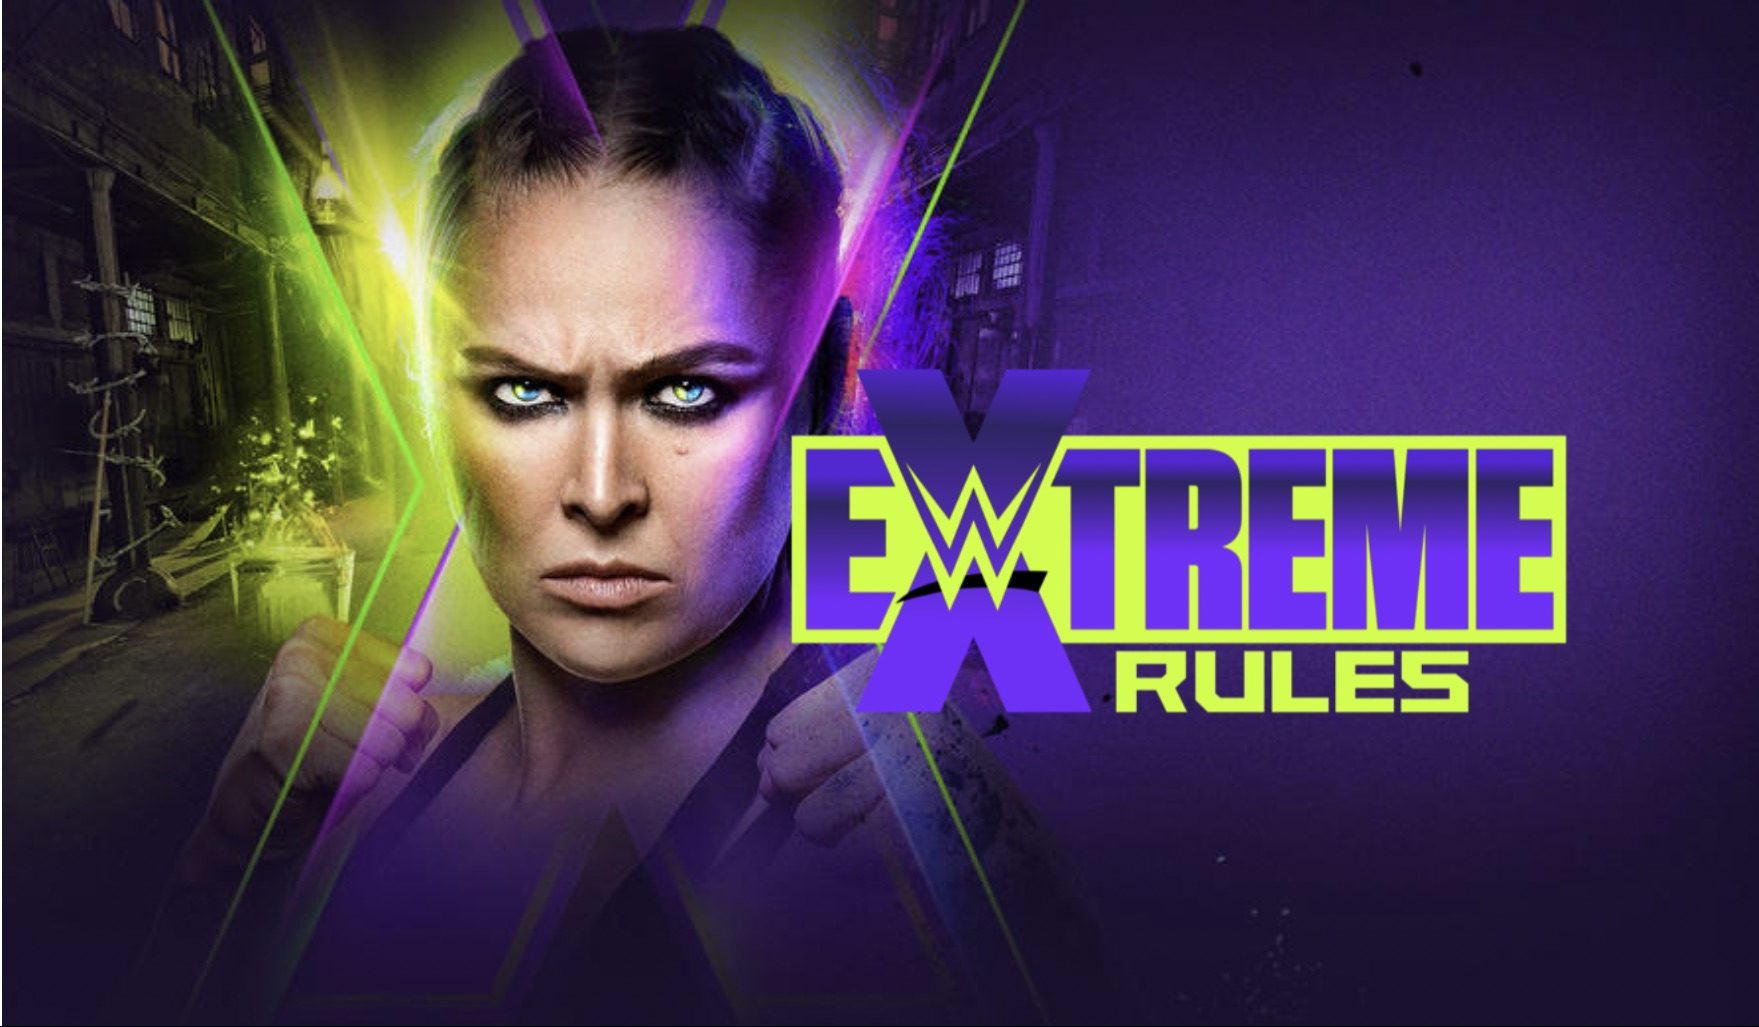 WWE Extreme Rules 2022 preview, full card, predictions